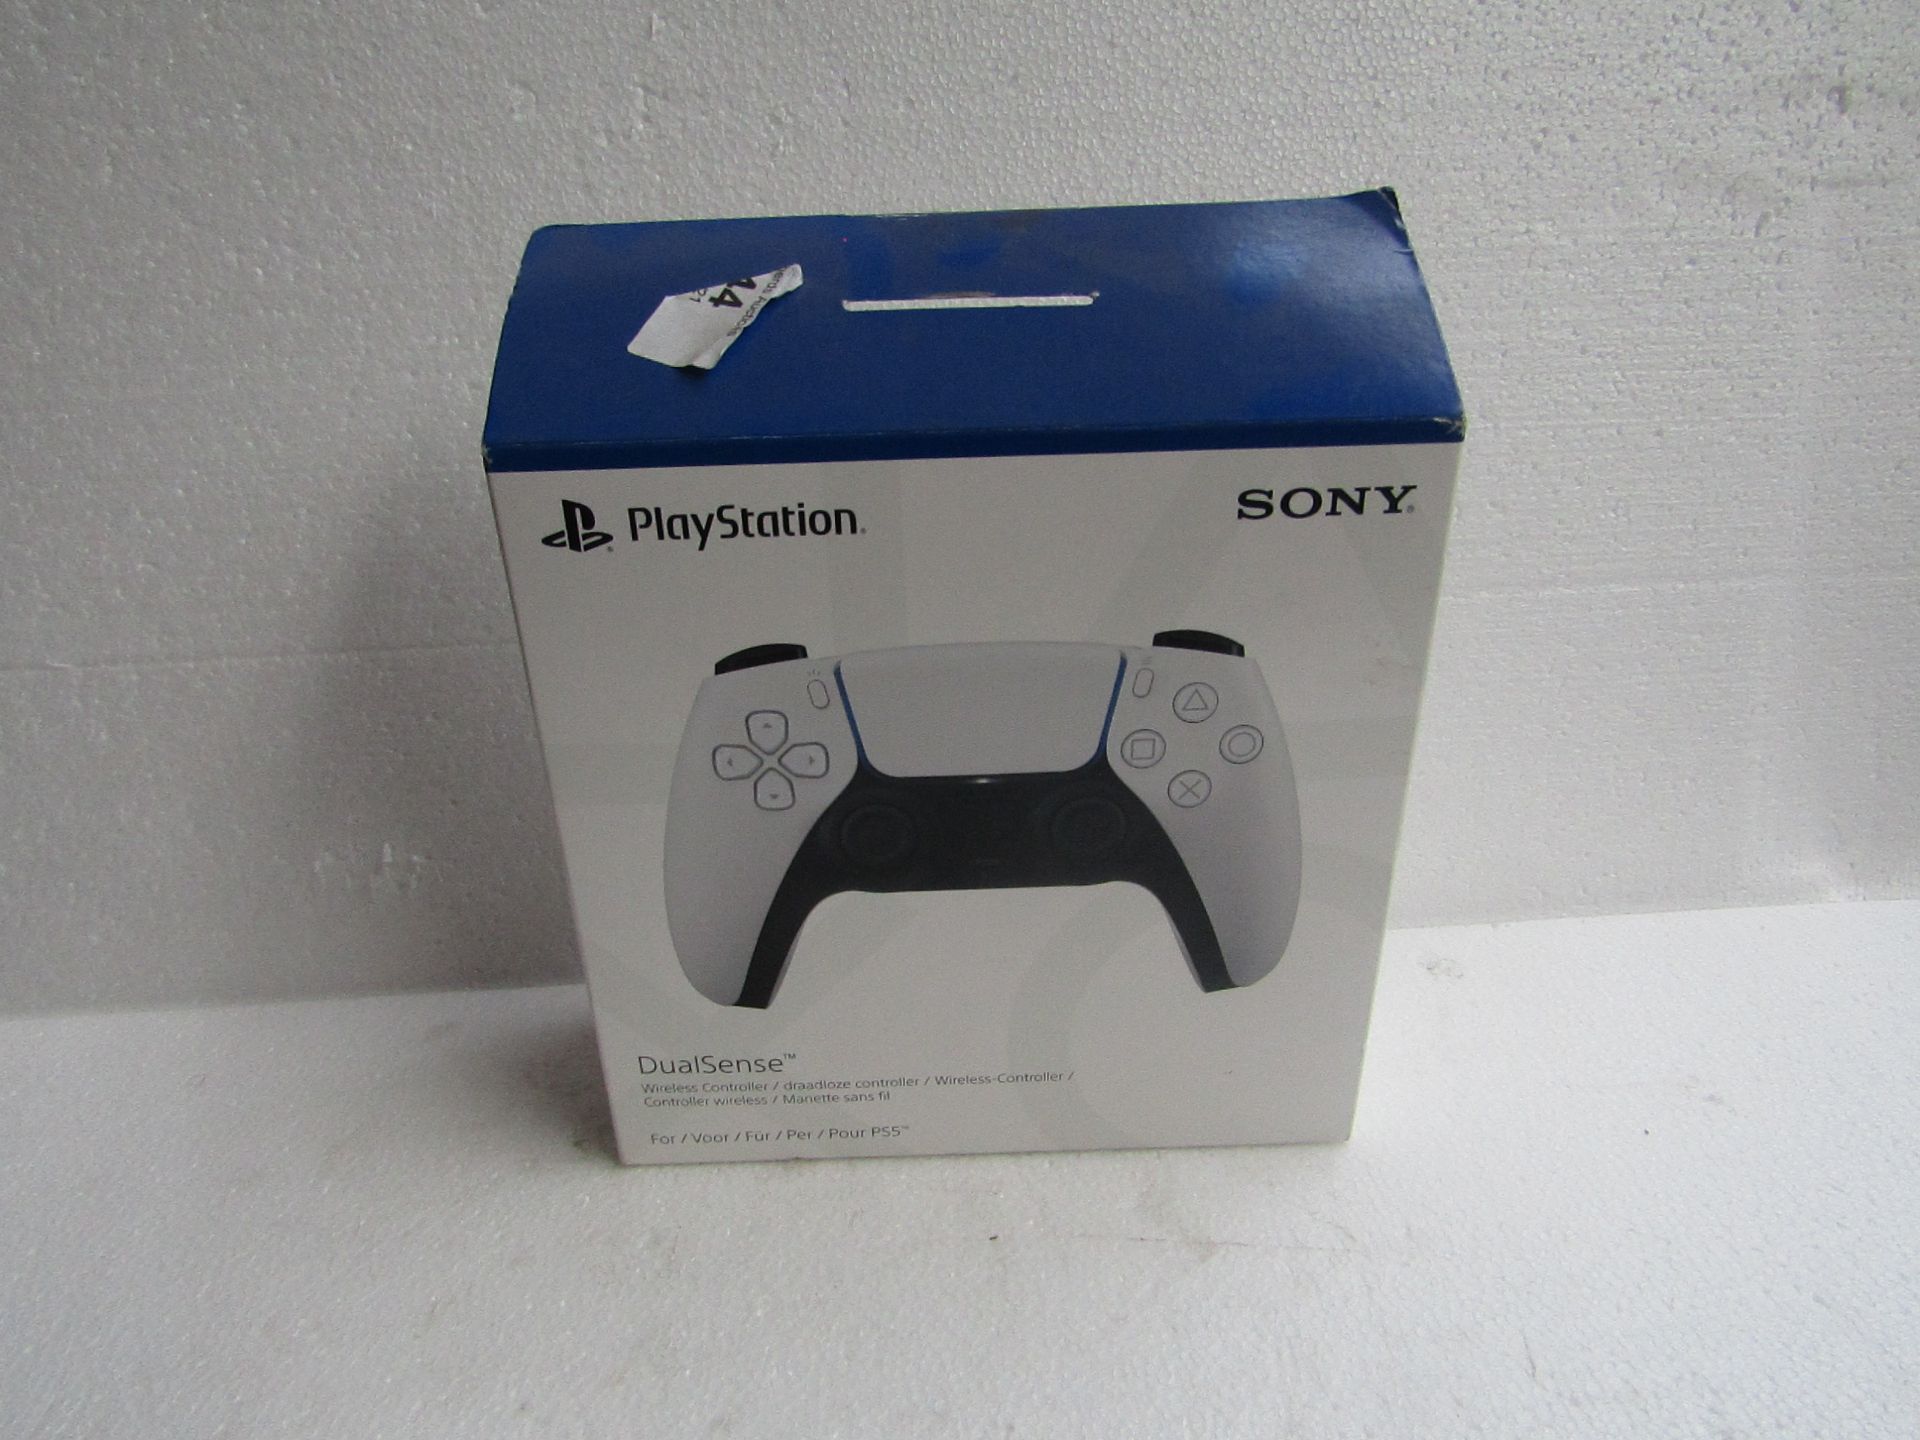 Playstation 5 controller, tested working but has a fault. This is picked at random but faults can